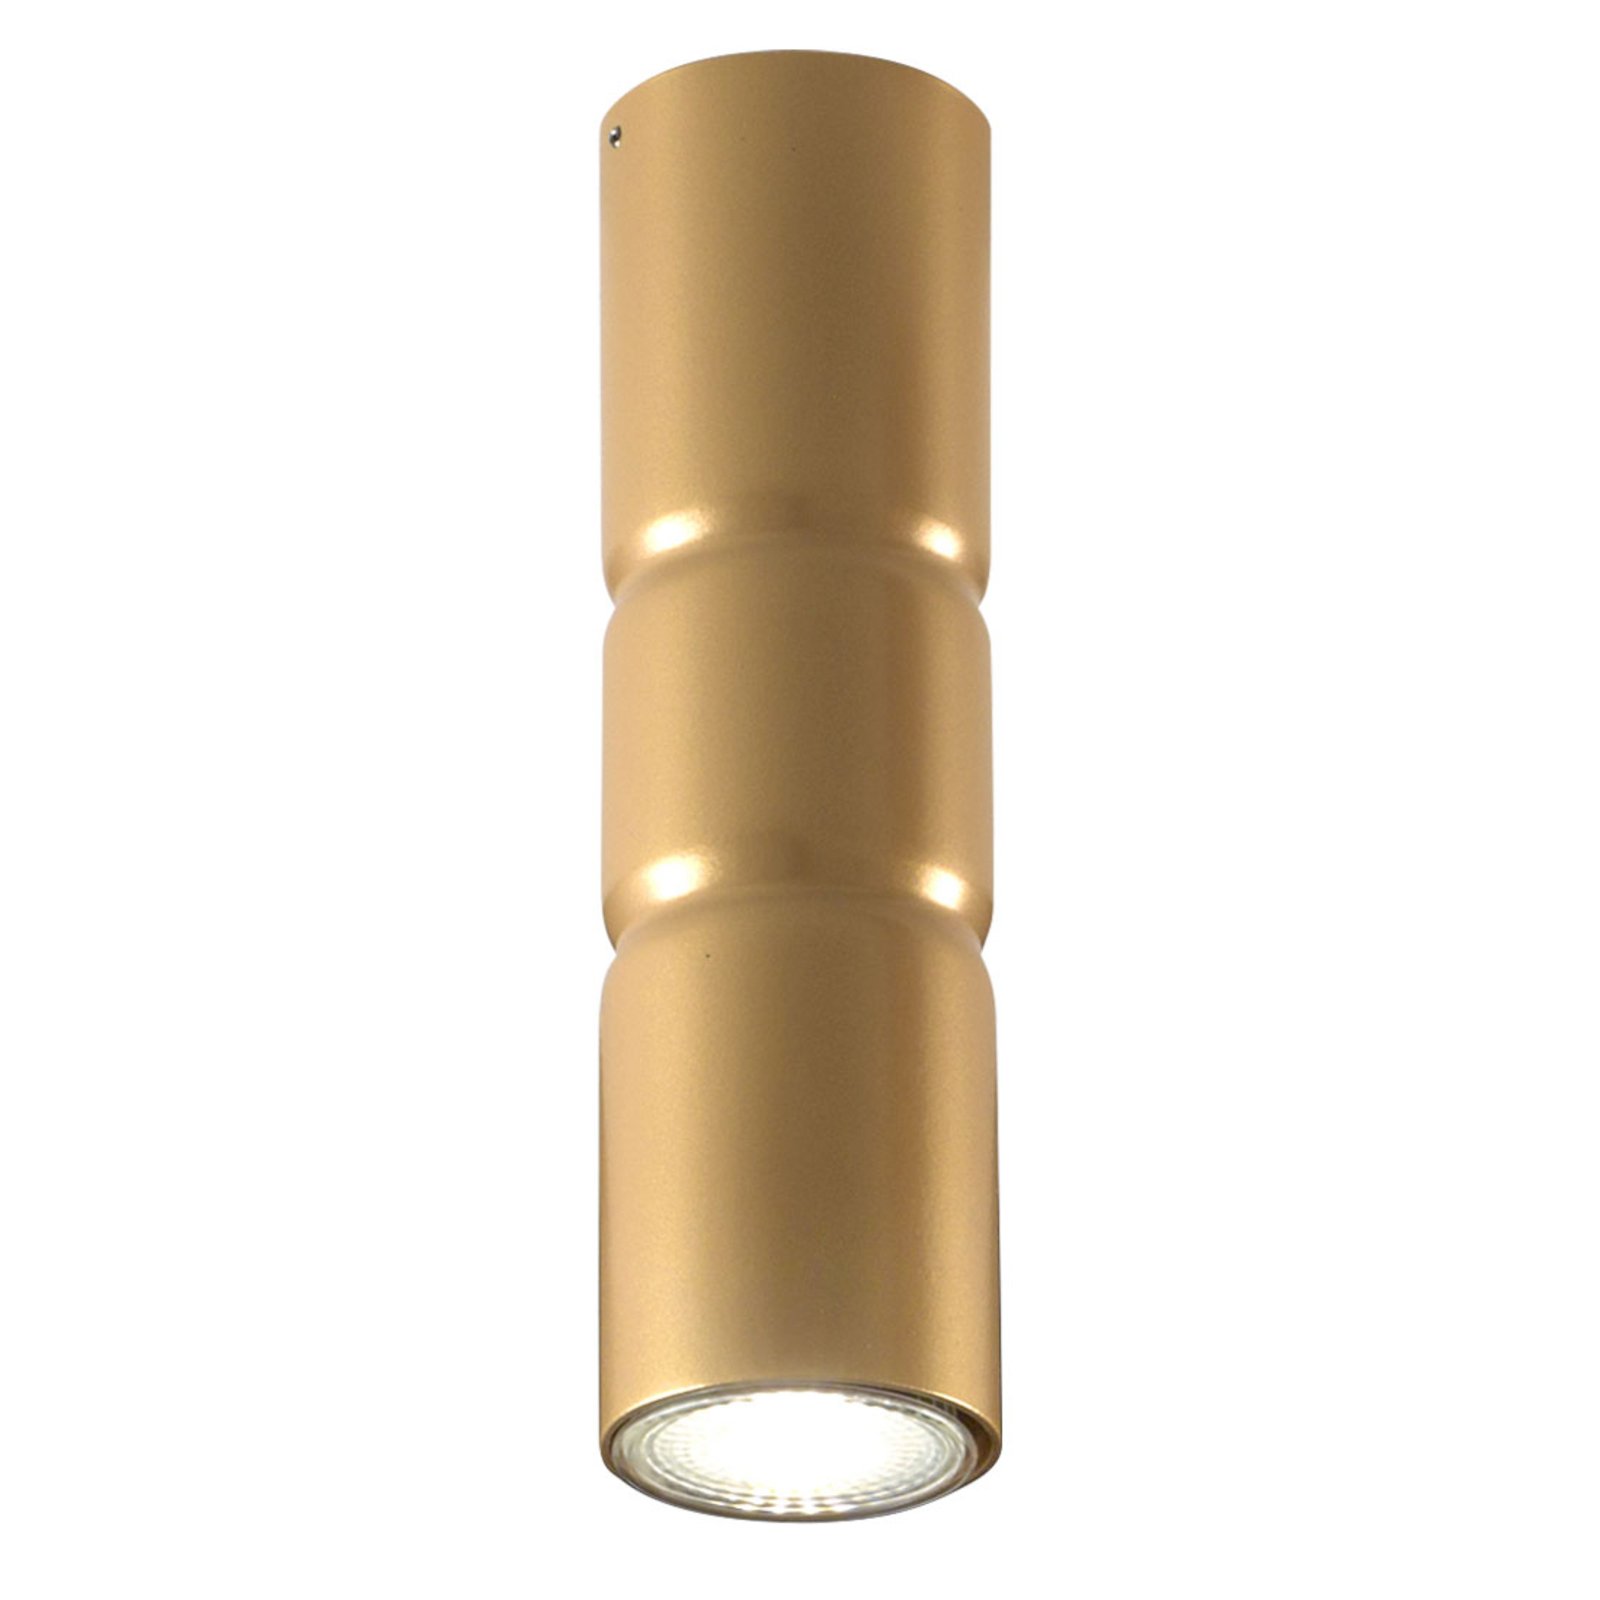 Turbo surface-mounted ceiling light, fixed, gold